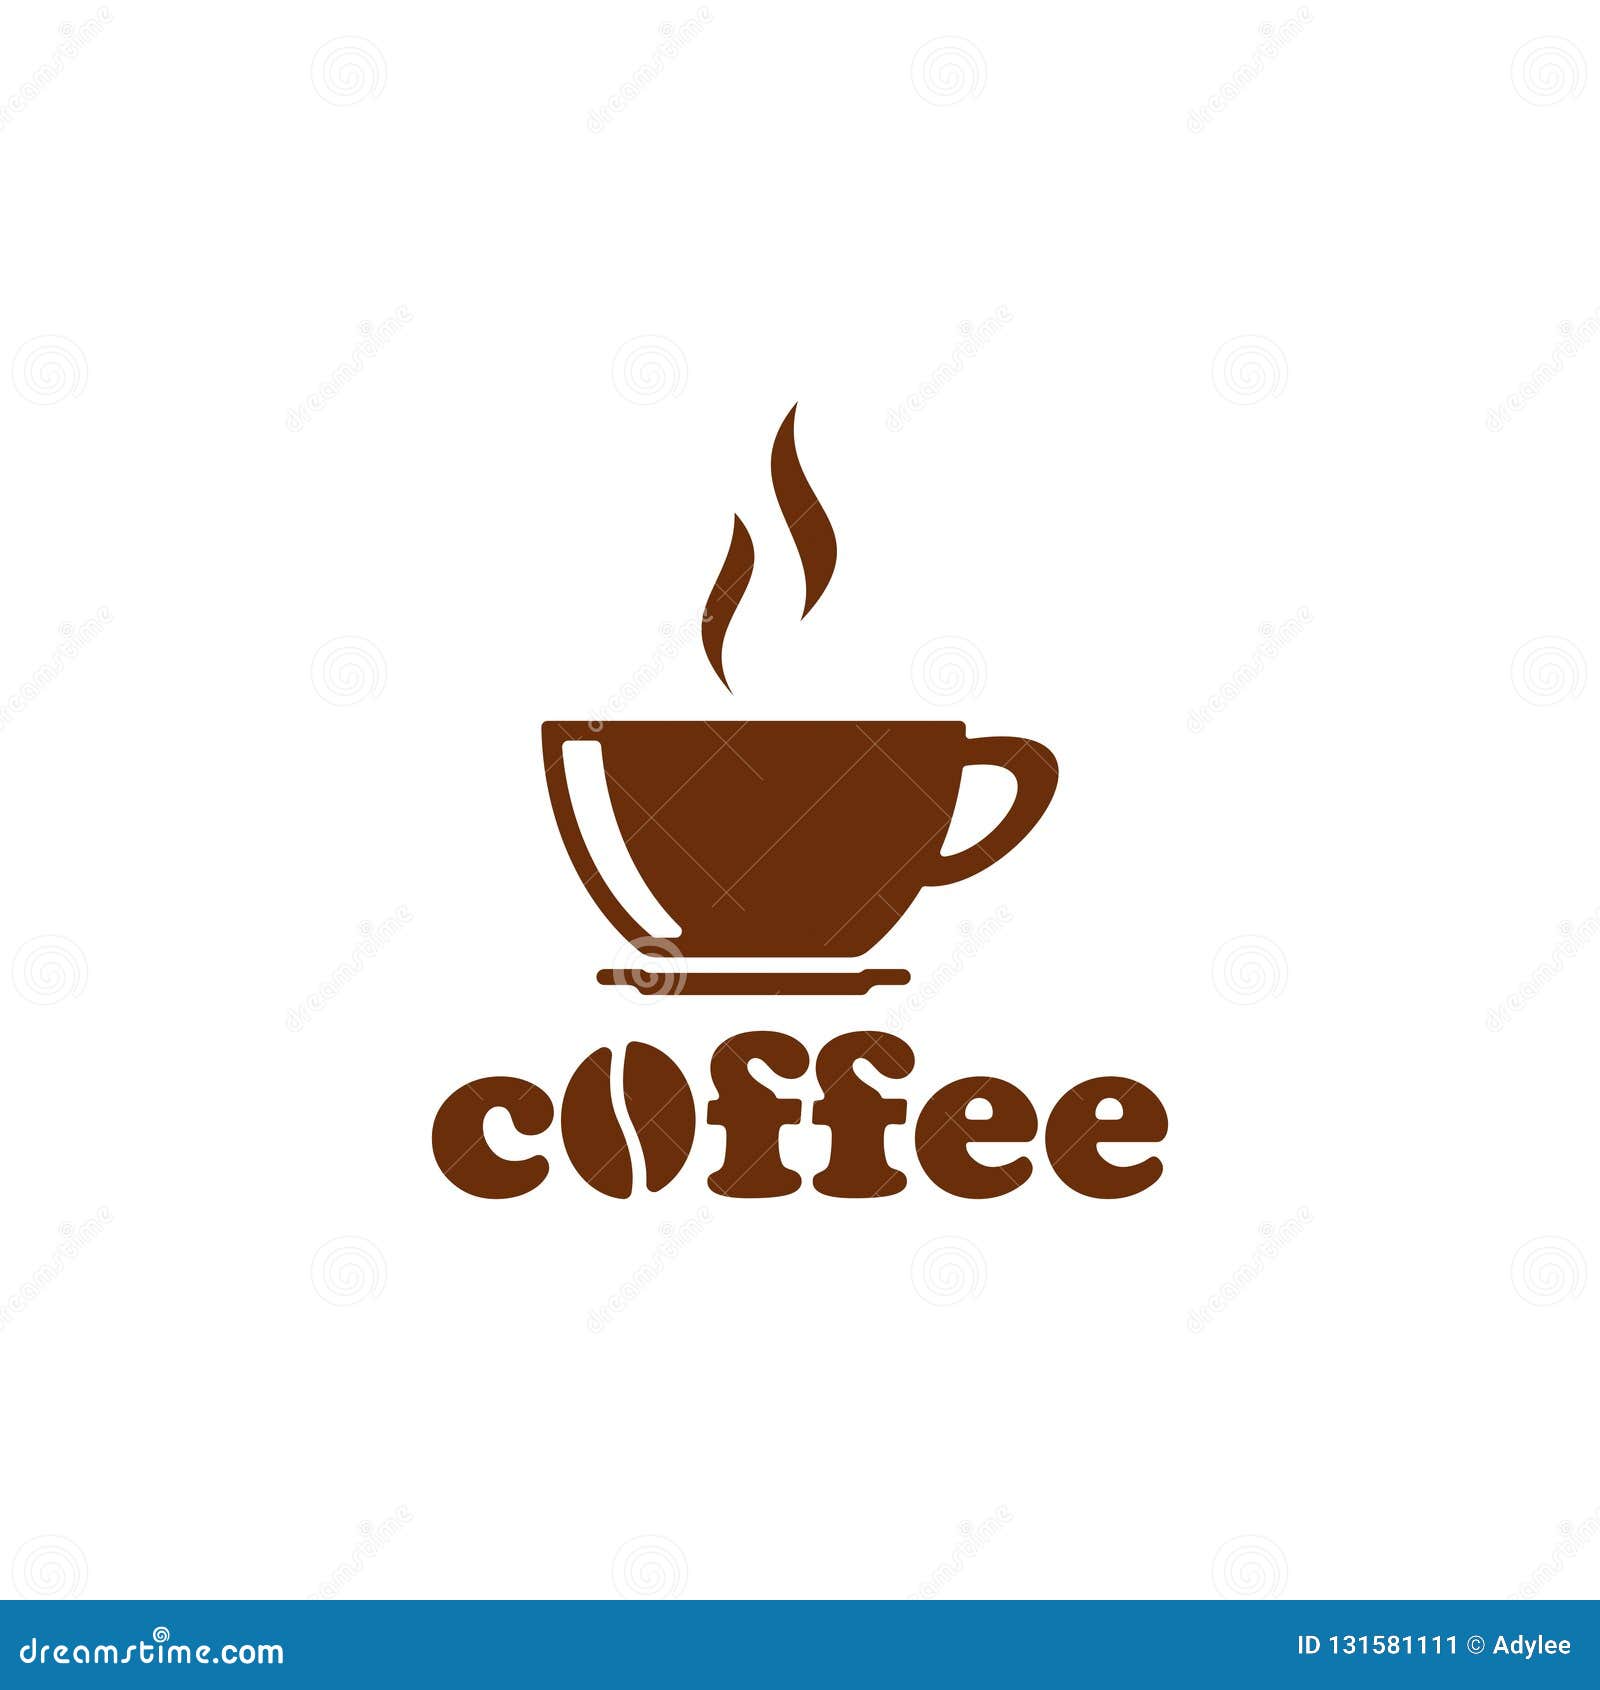 https://thumbs.dreamstime.com/z/stock-vector-coffee-cup-tea-cup-icon-logo-isolated-soli-background-png-file-coffee-cup-icon-131581111.jpg